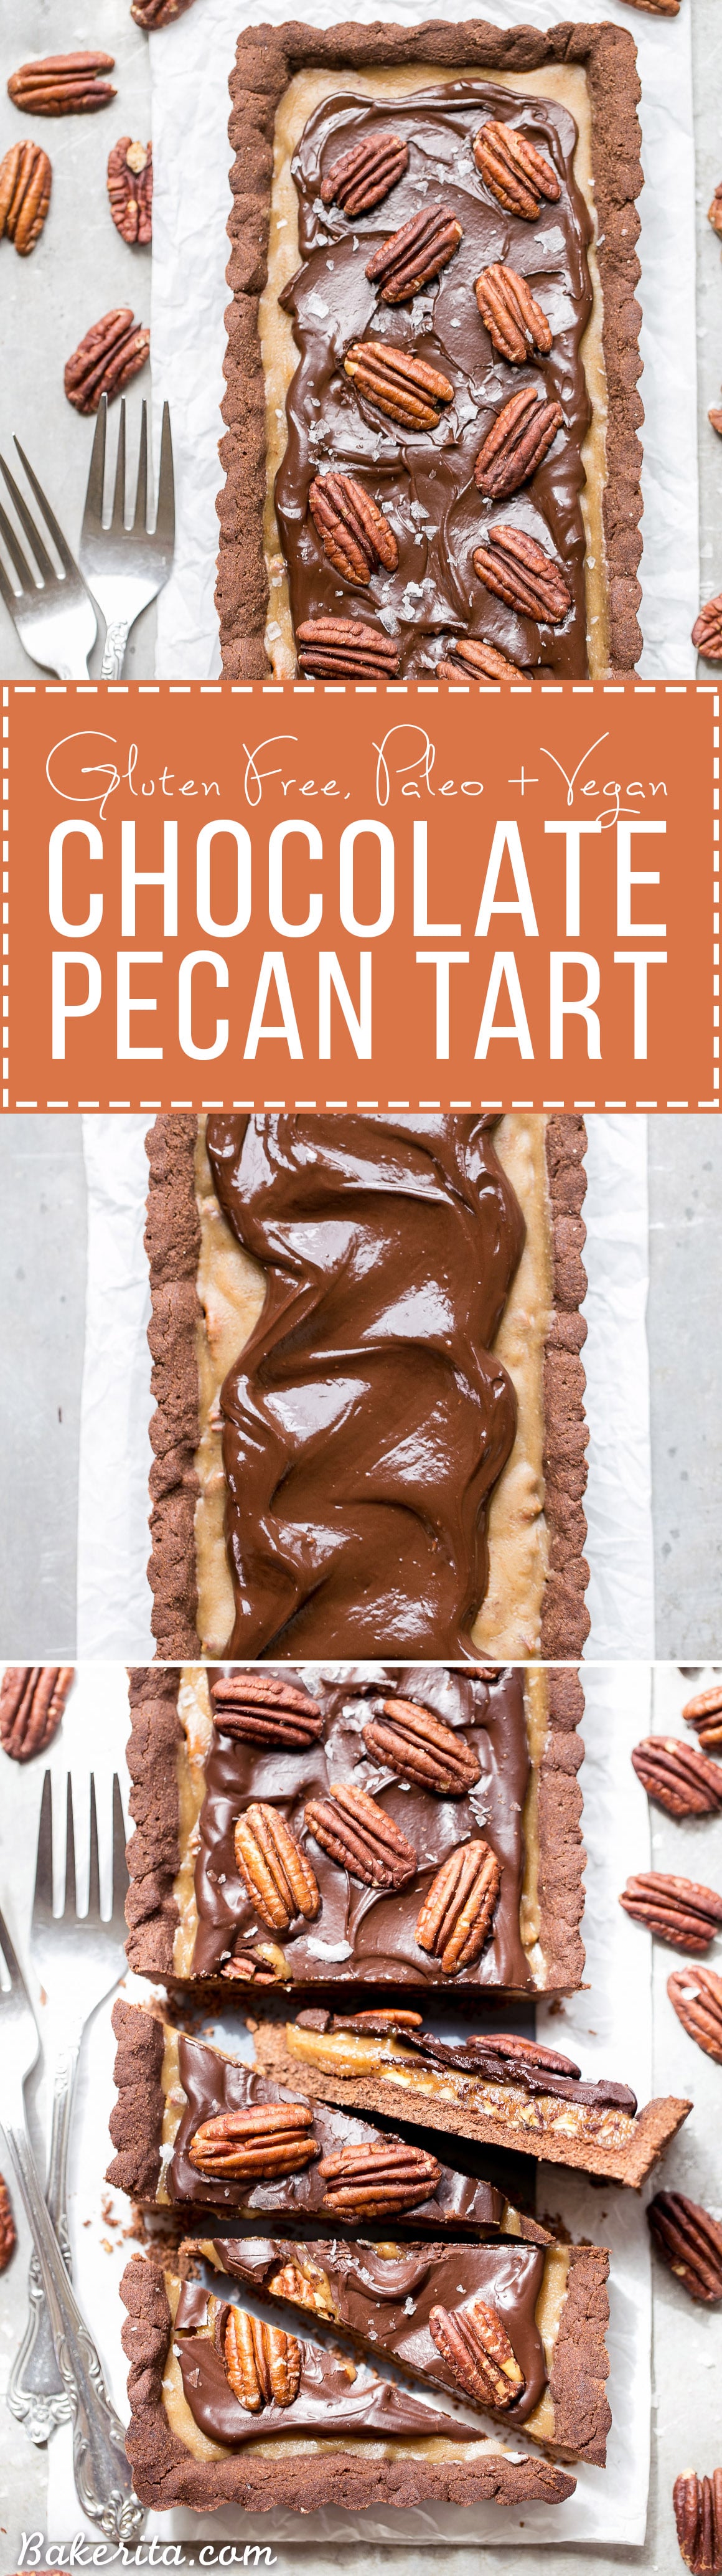 This Chocolate Pecan Tart has a chocolate shortbread crust, pecan pie filling, and is topped with dark chocolate ganache, pecans + a sprinkle of sea salt! You won't believe that this is gluten-free, Paleo, refined sugar free, and vegan.